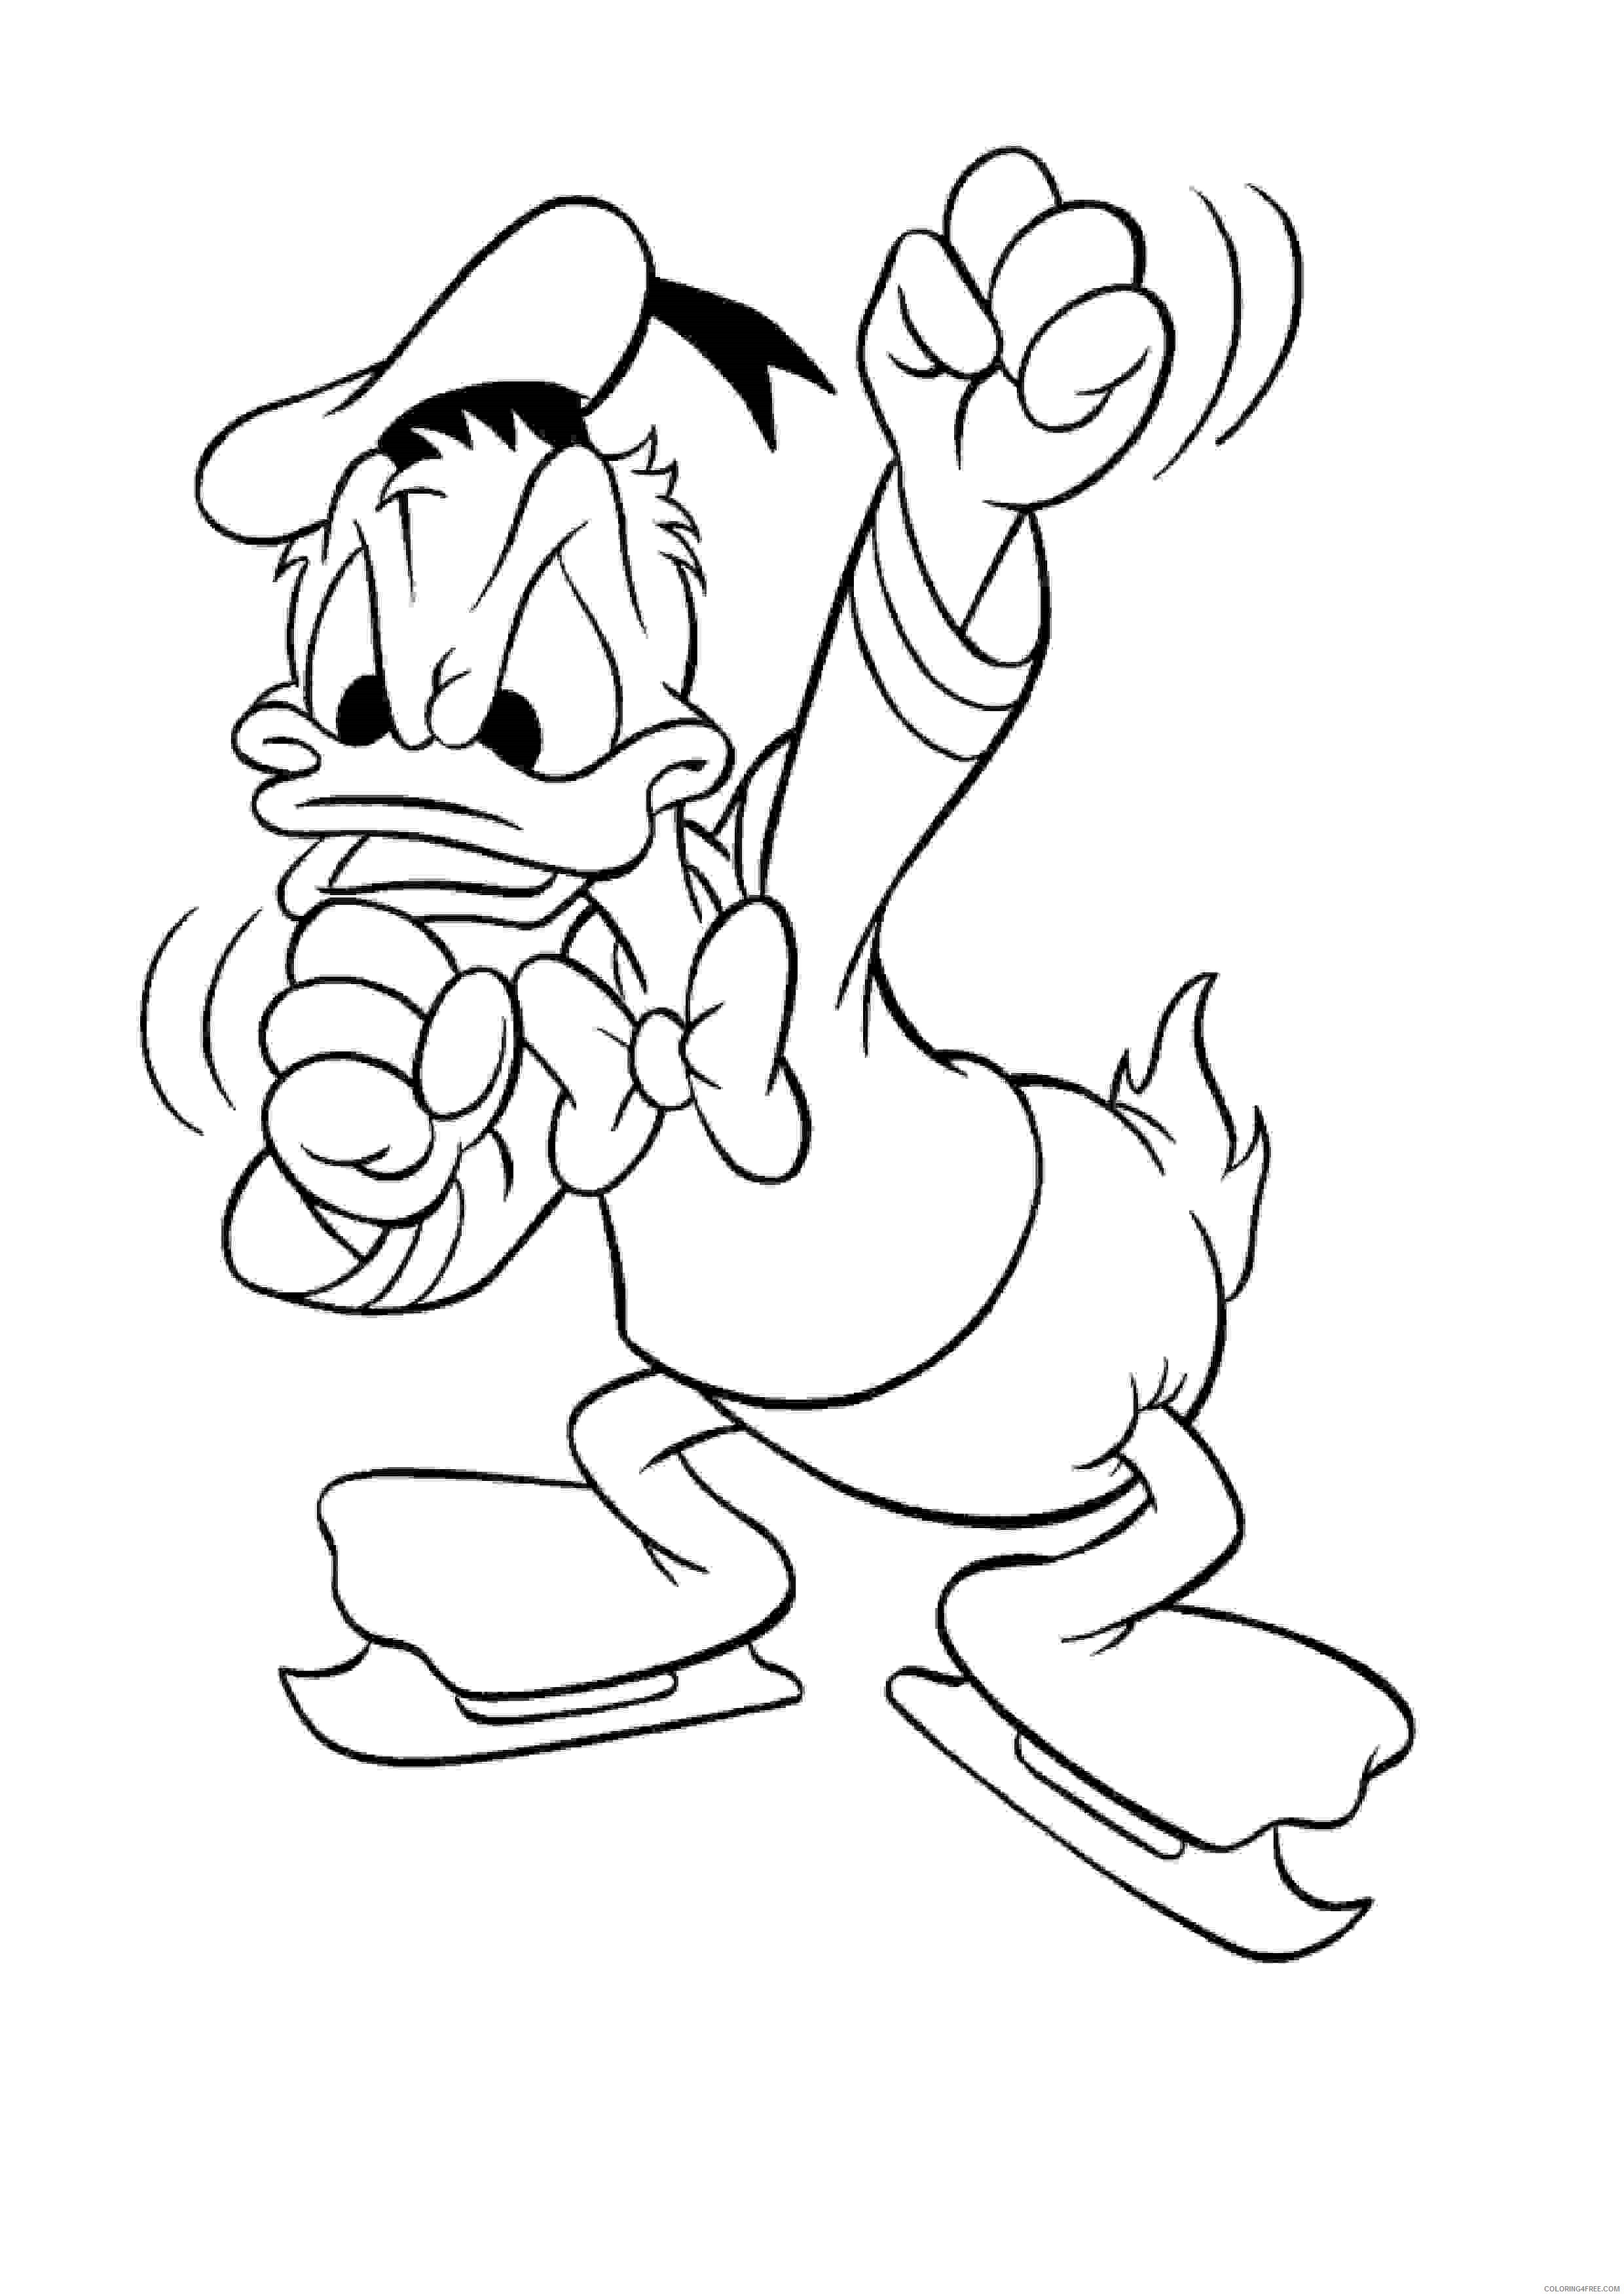 Disney Coloring Pages Printable Coloring4free